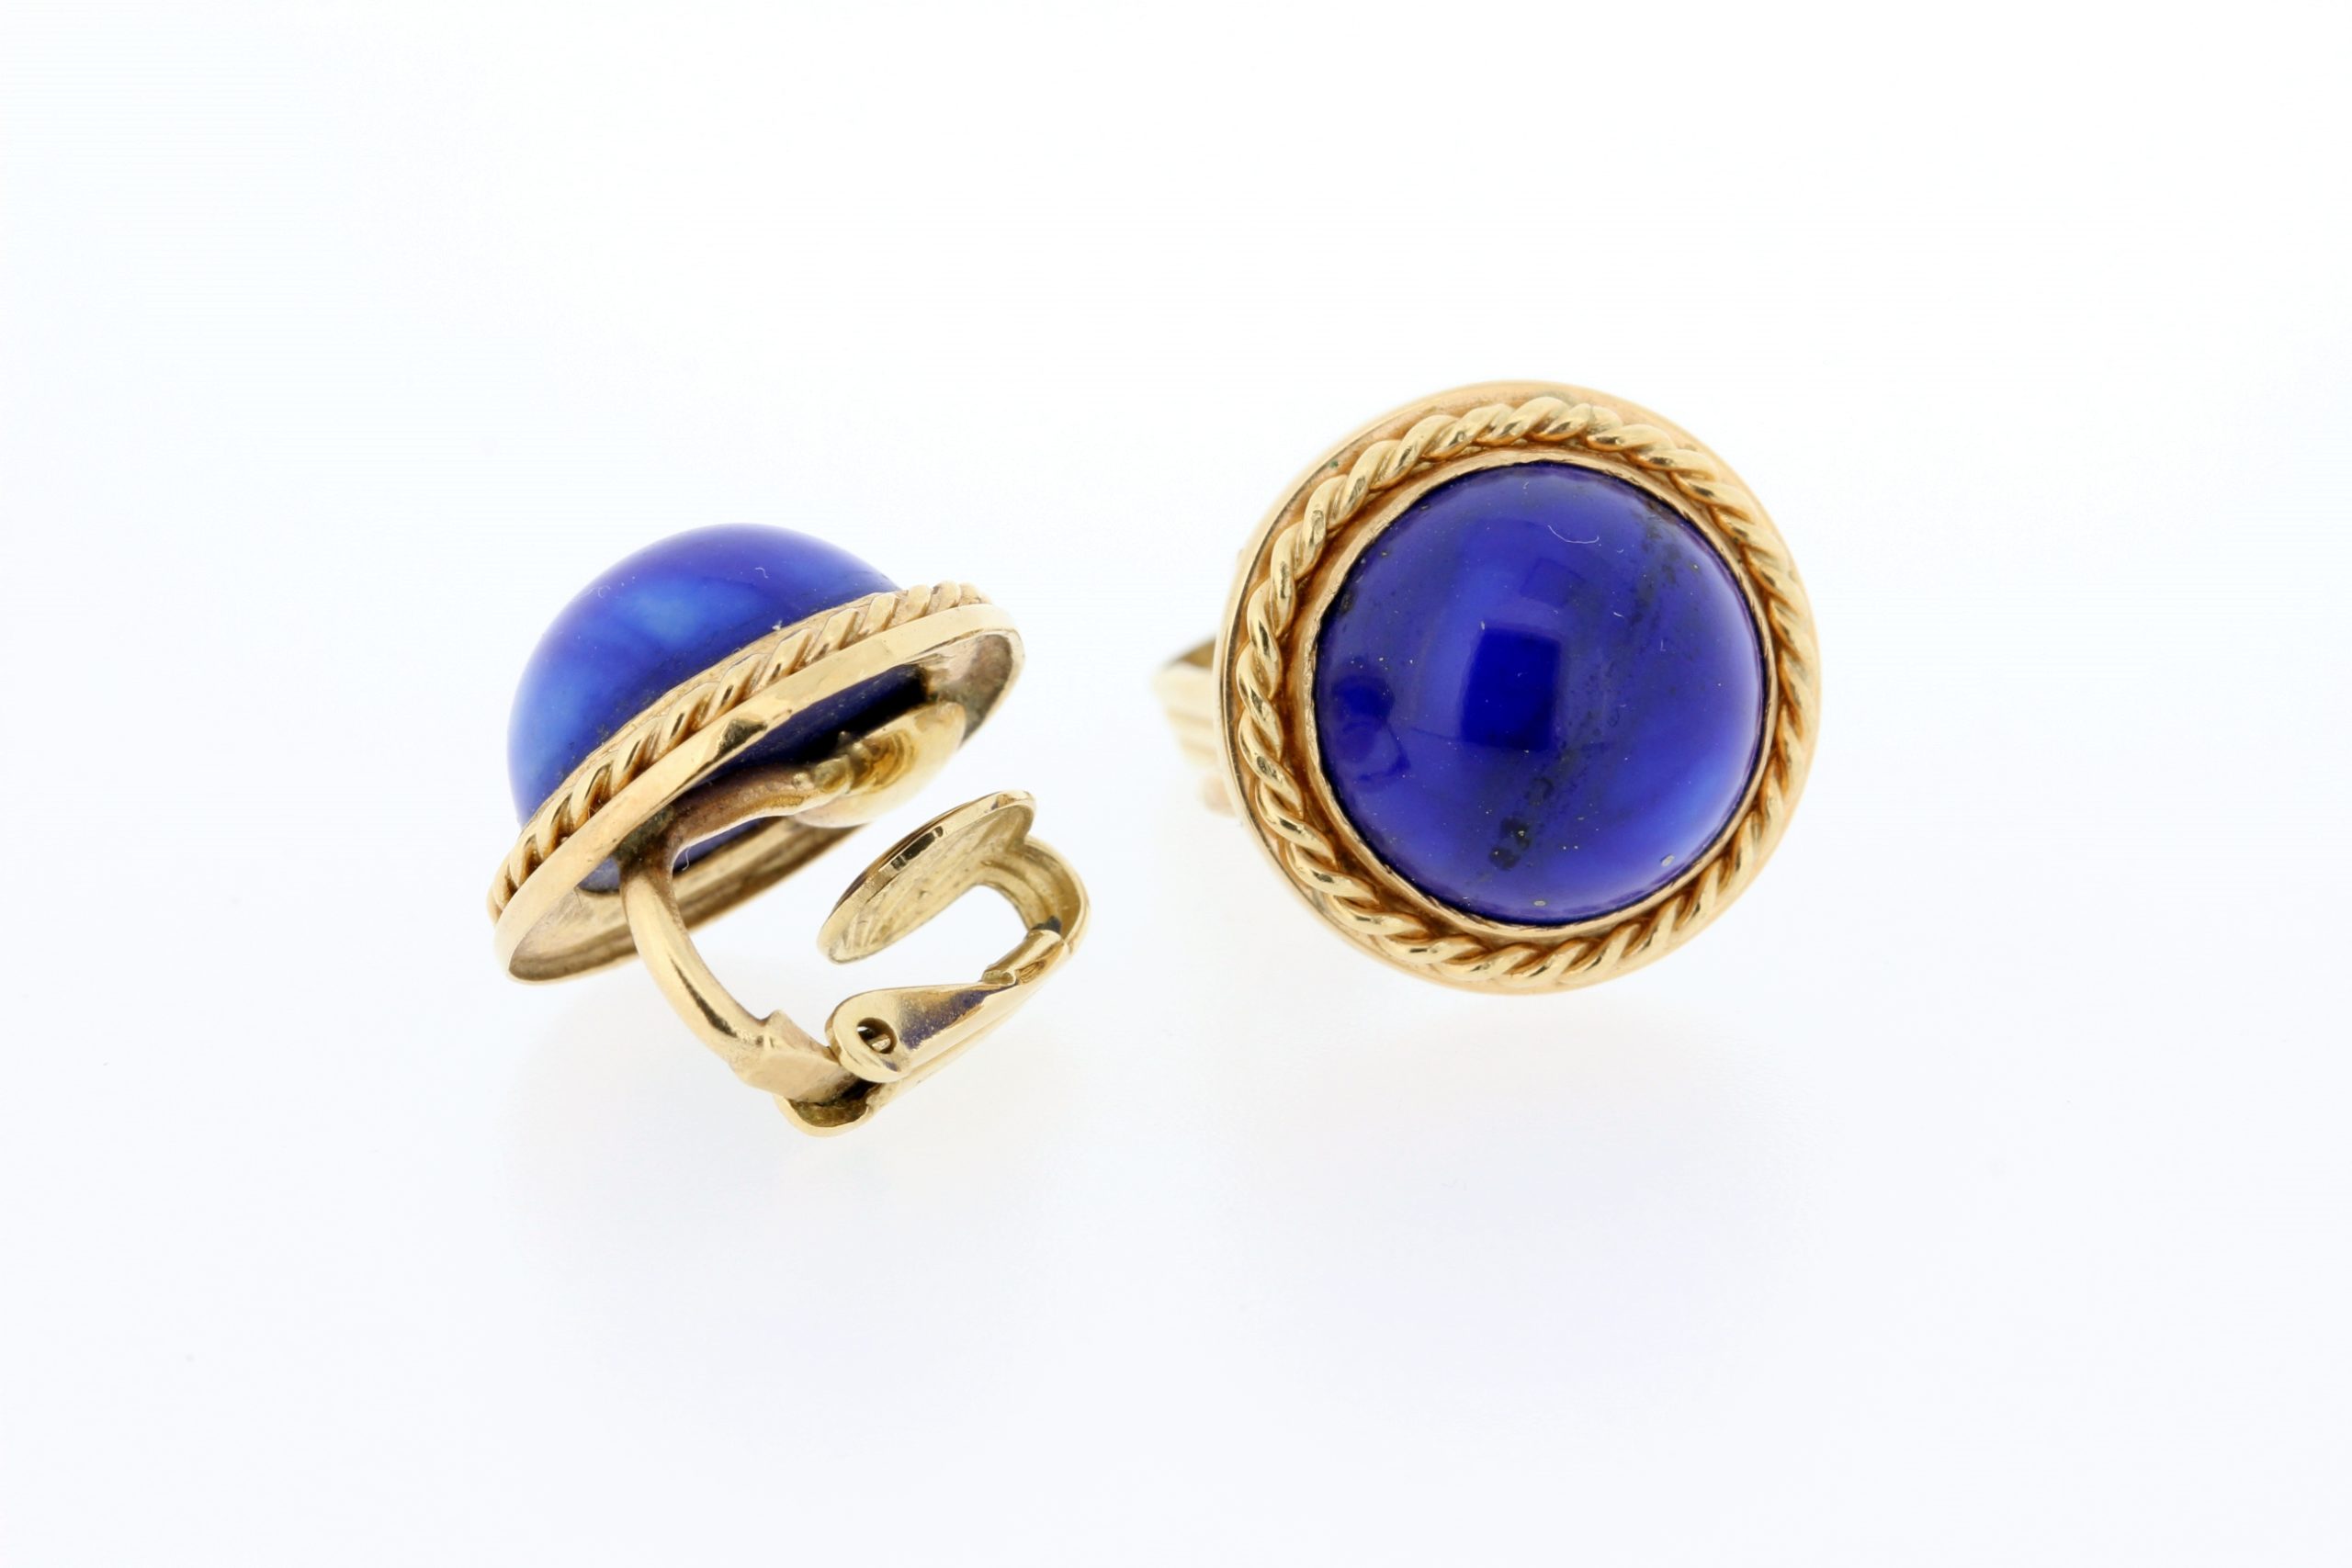 14KT Yellow Gold Earrings with Round Blue Cabochon Genuine Lapis Ear Wires  NEW | eBay